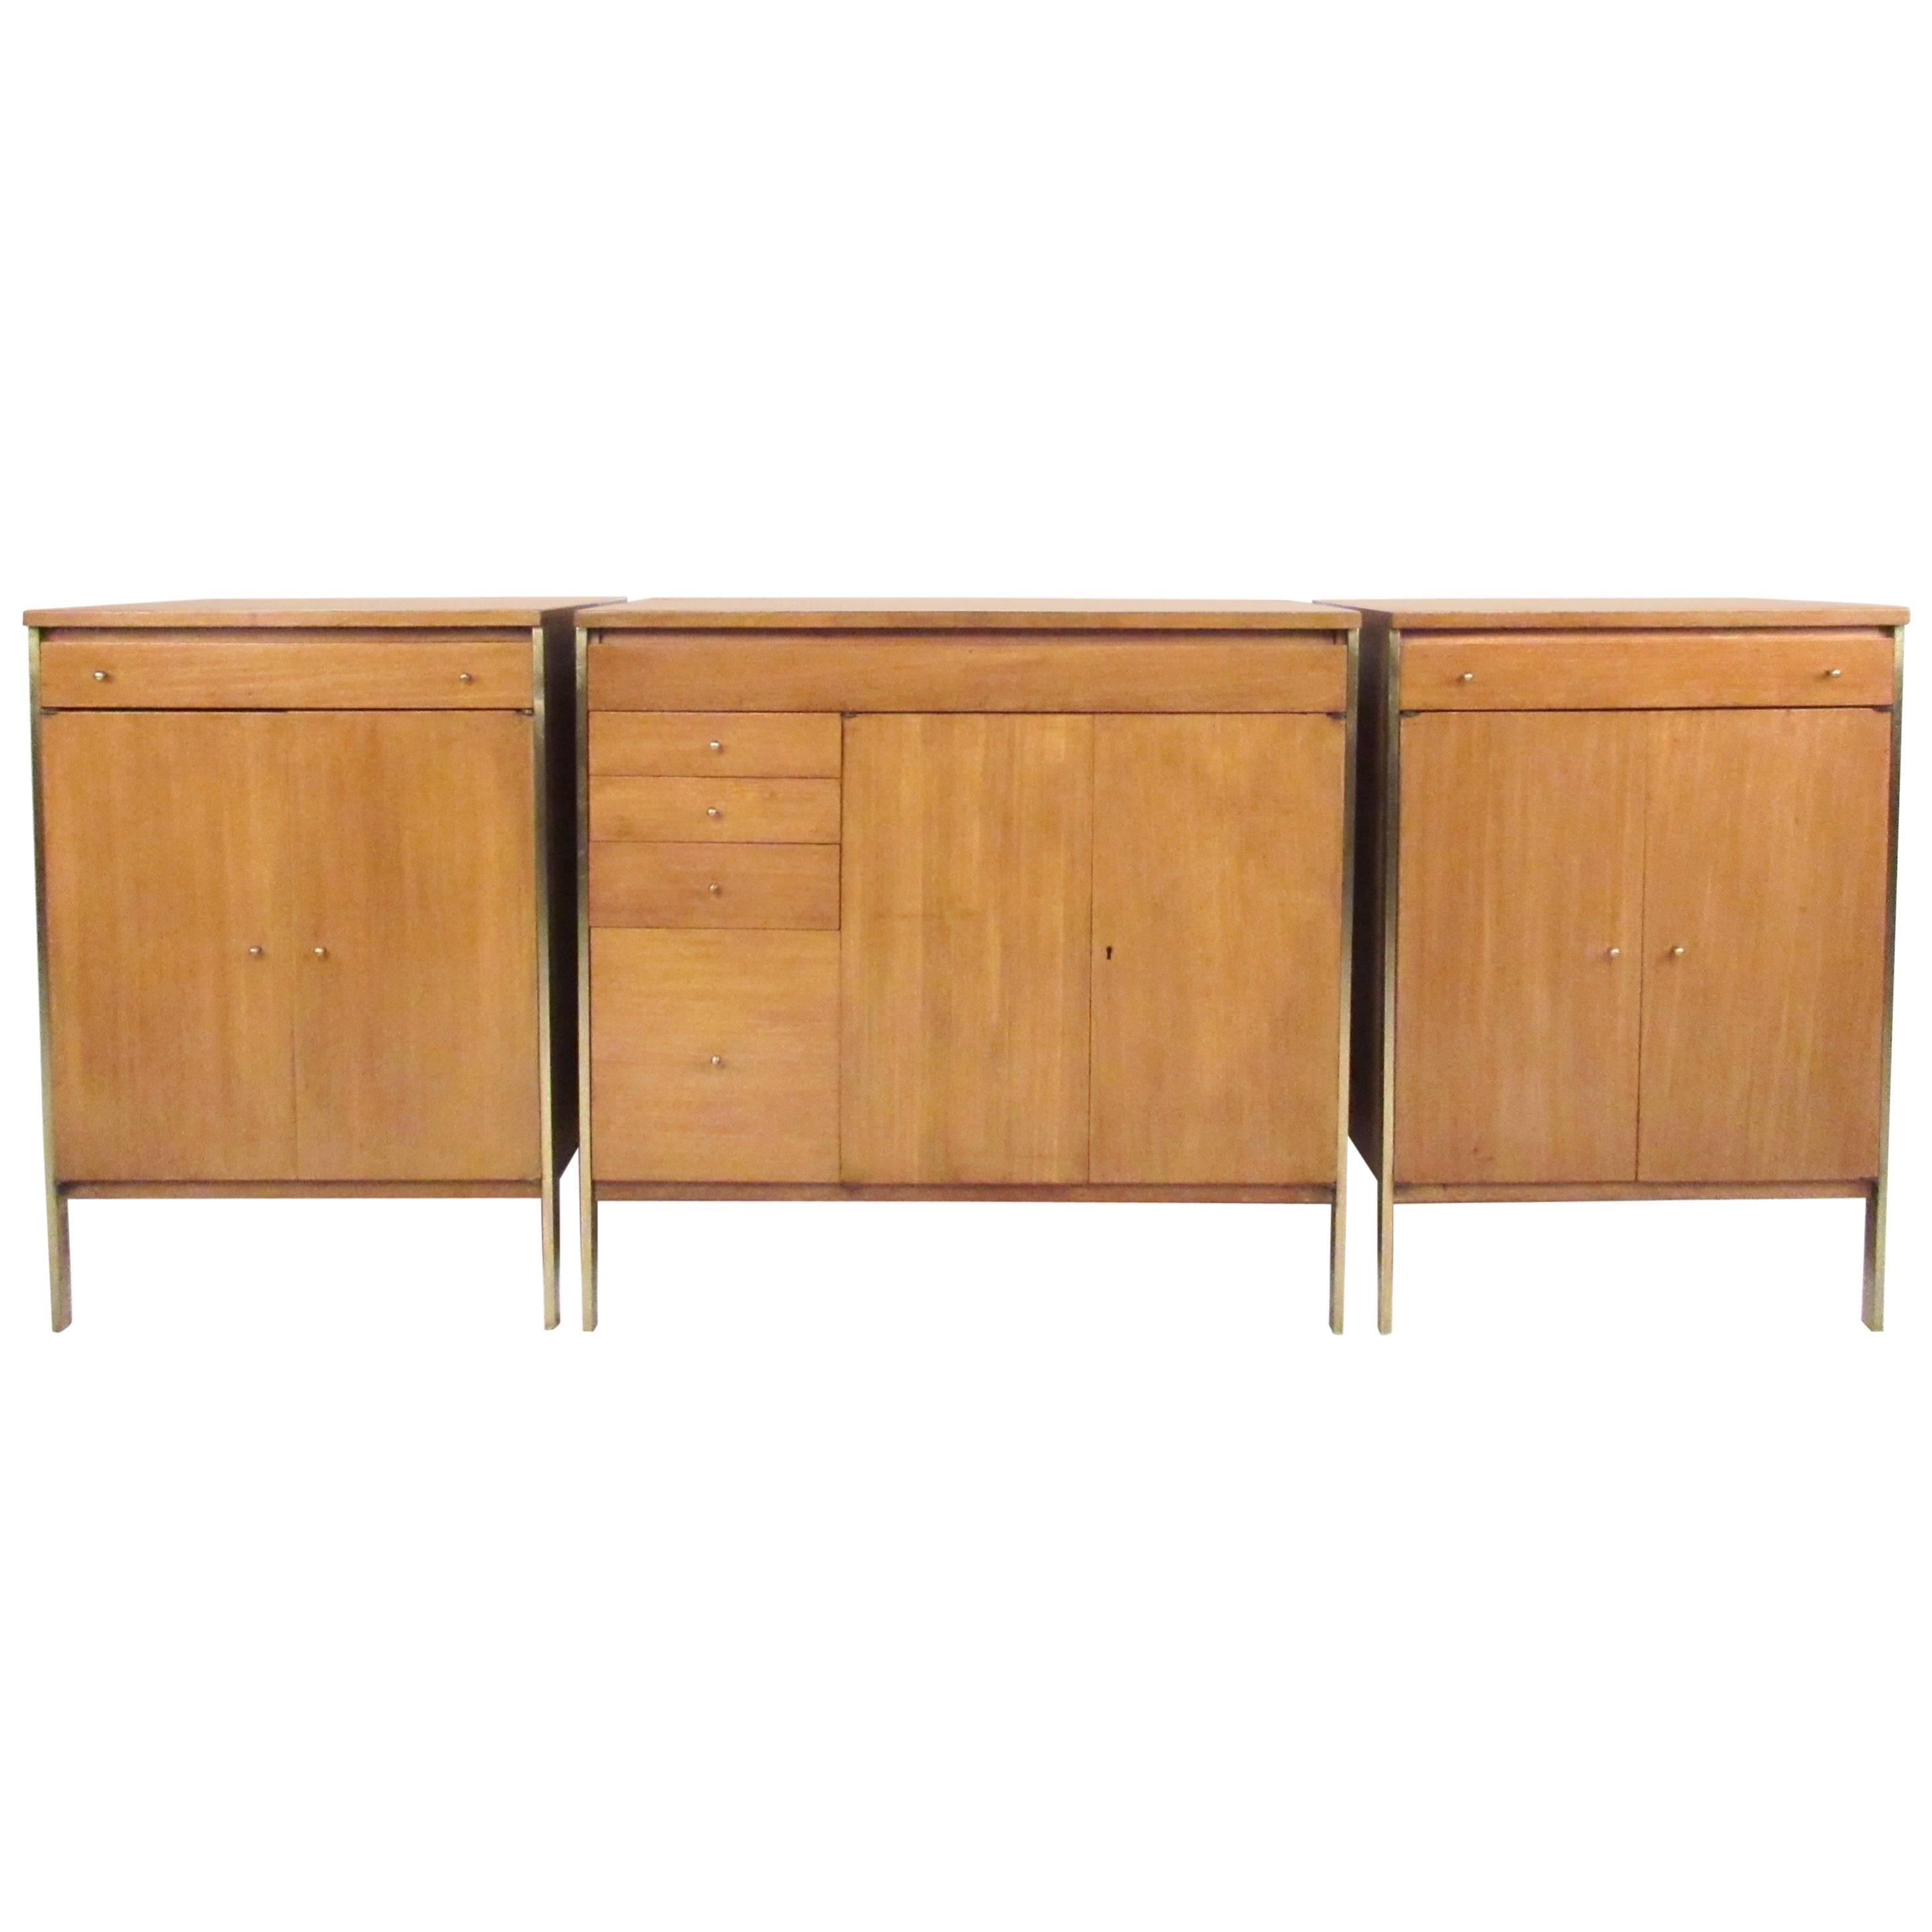 Paul McCobb Connoisseur Collection Three-Piece Sideboard for H. Sacks and Son